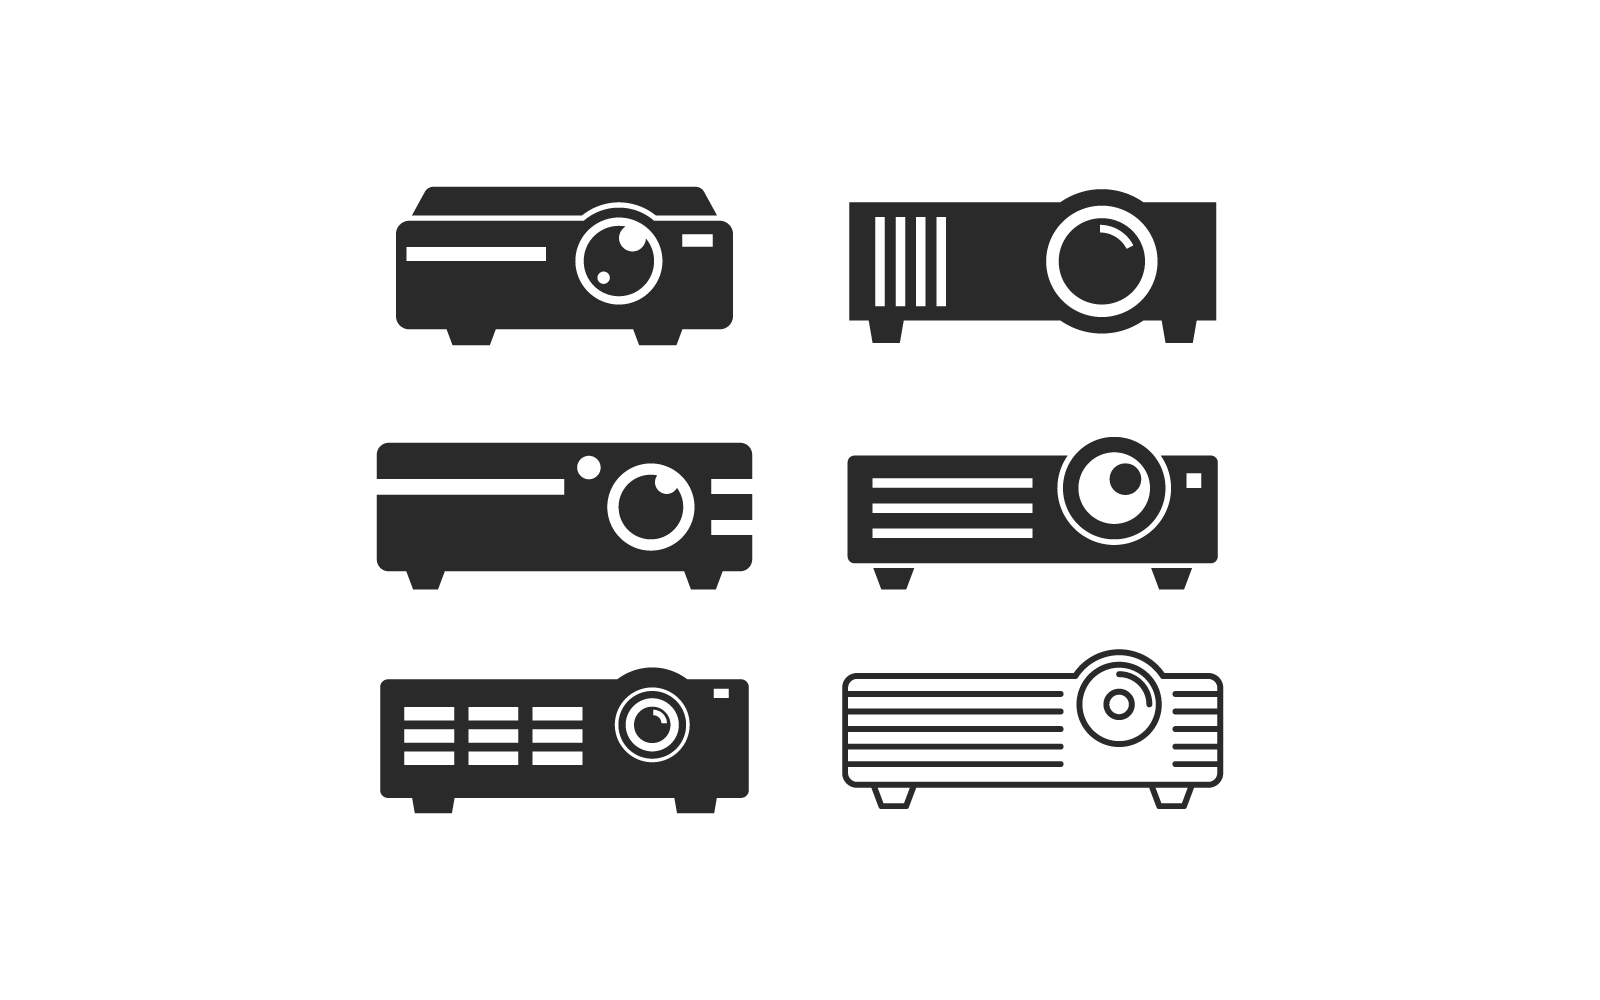 Projector icon in flat design vector illustration